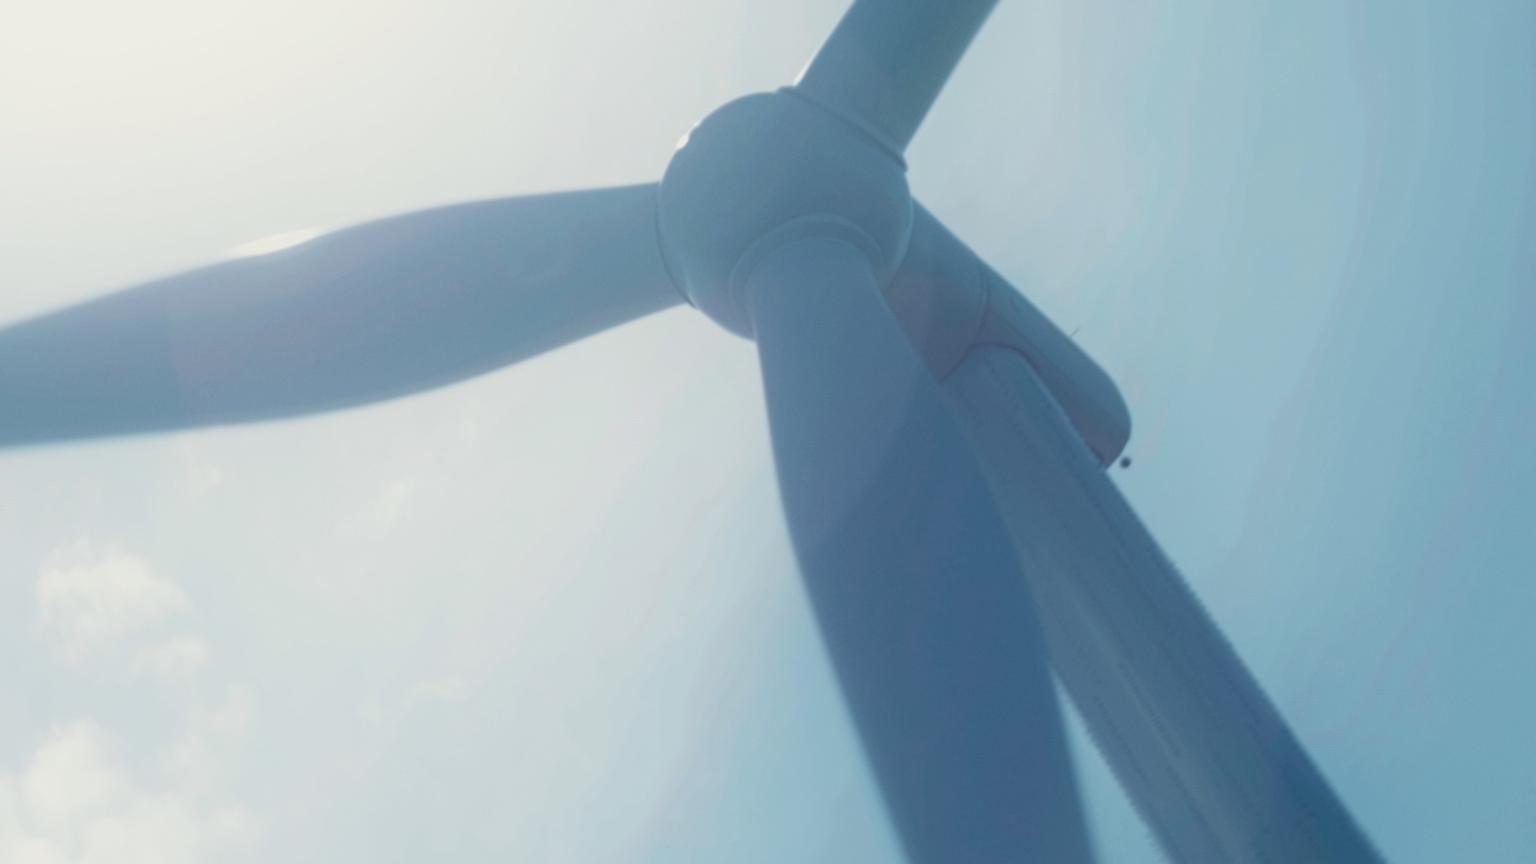 Norway is pioneering the future of offshore wind